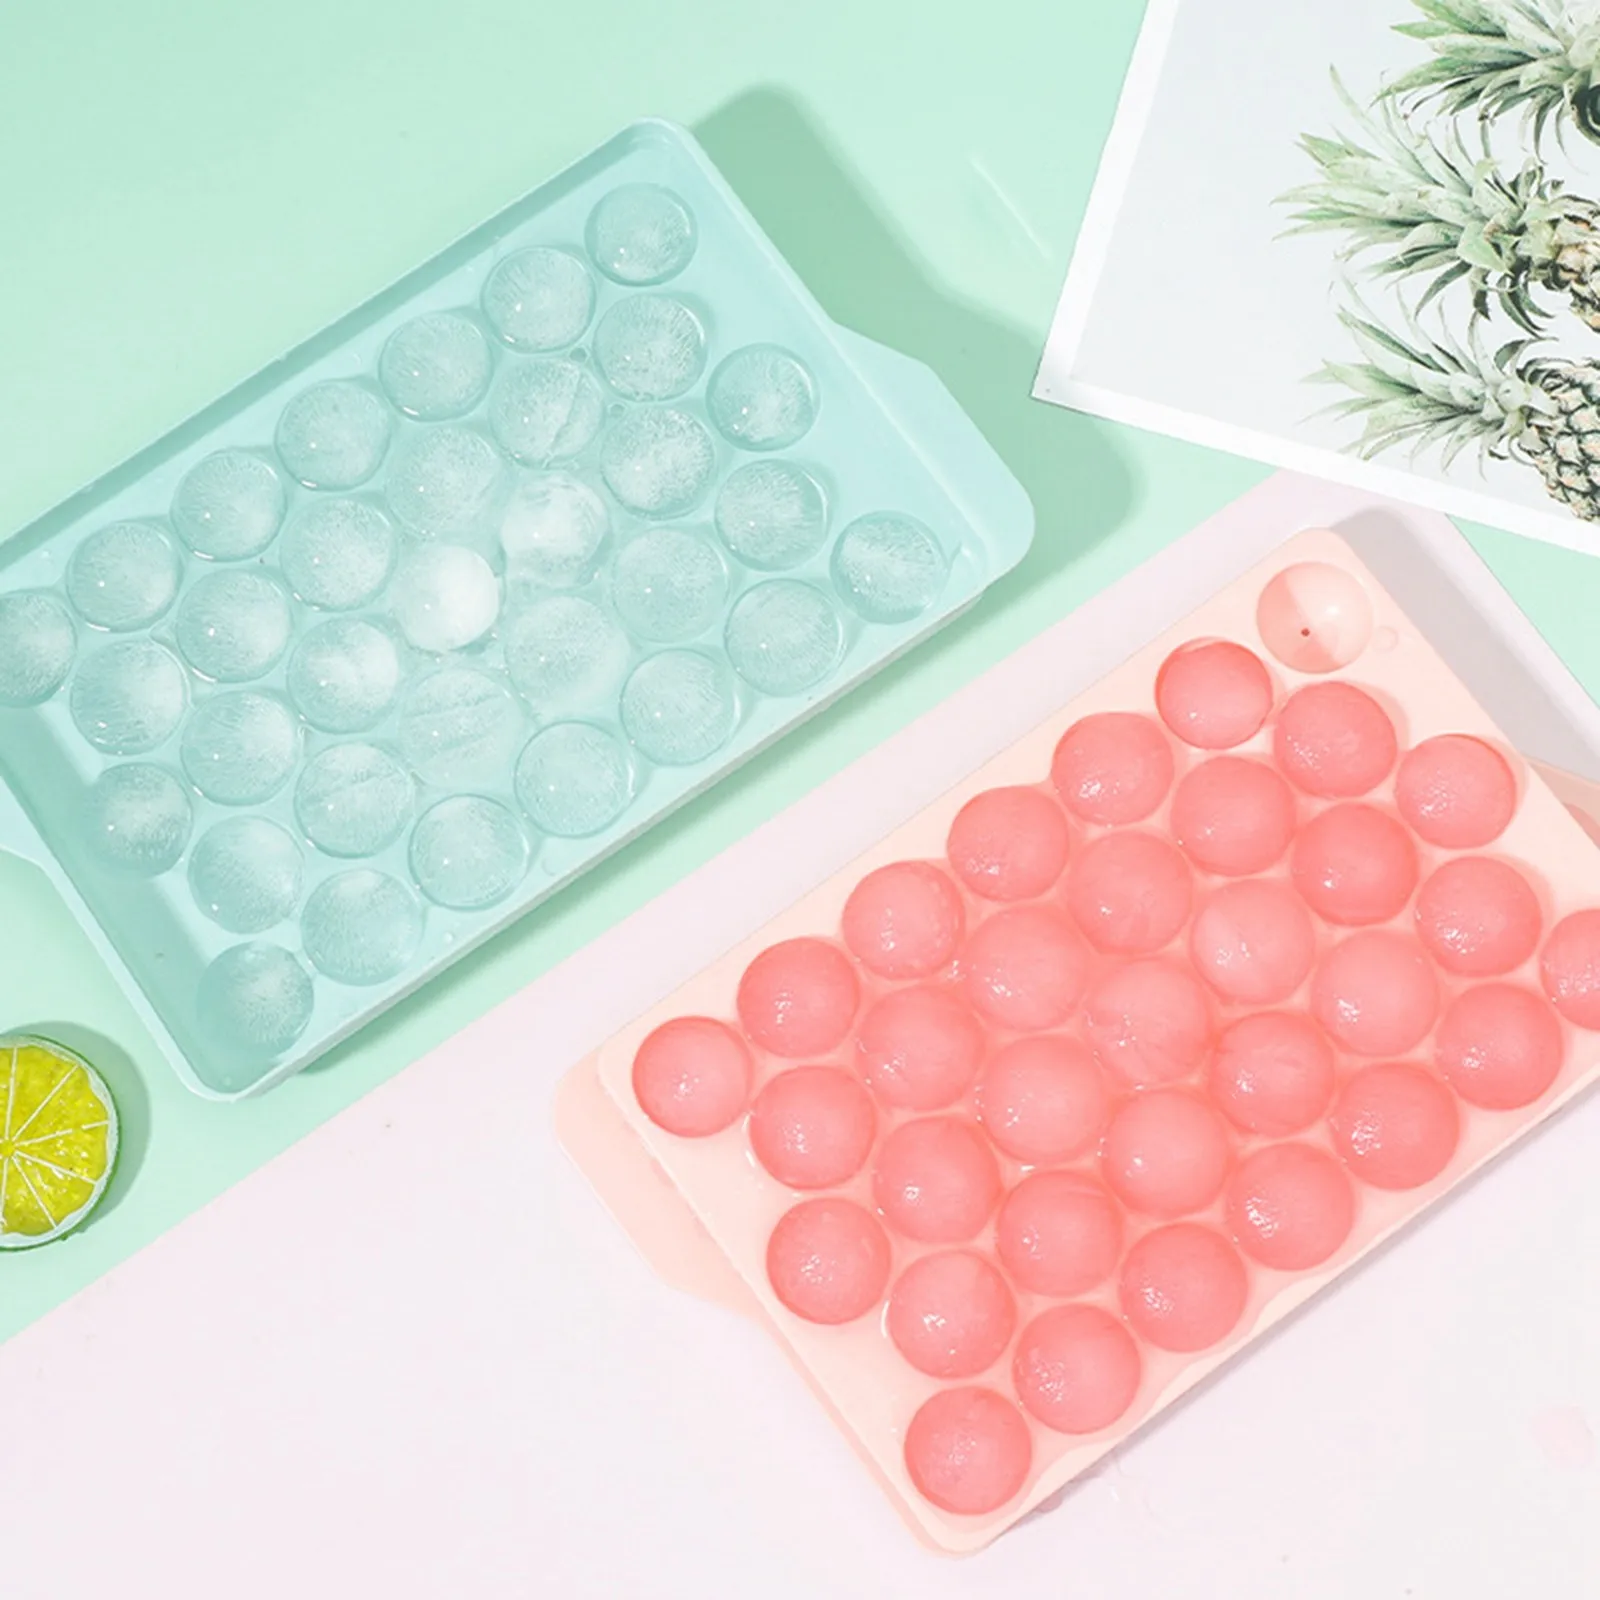 

37 Grid Honeycomb Silicone Ice Cube Mold Large-capacity Ice Tray Mold Reusable Food Grade Ice Maker With Lids Popsicle Mould